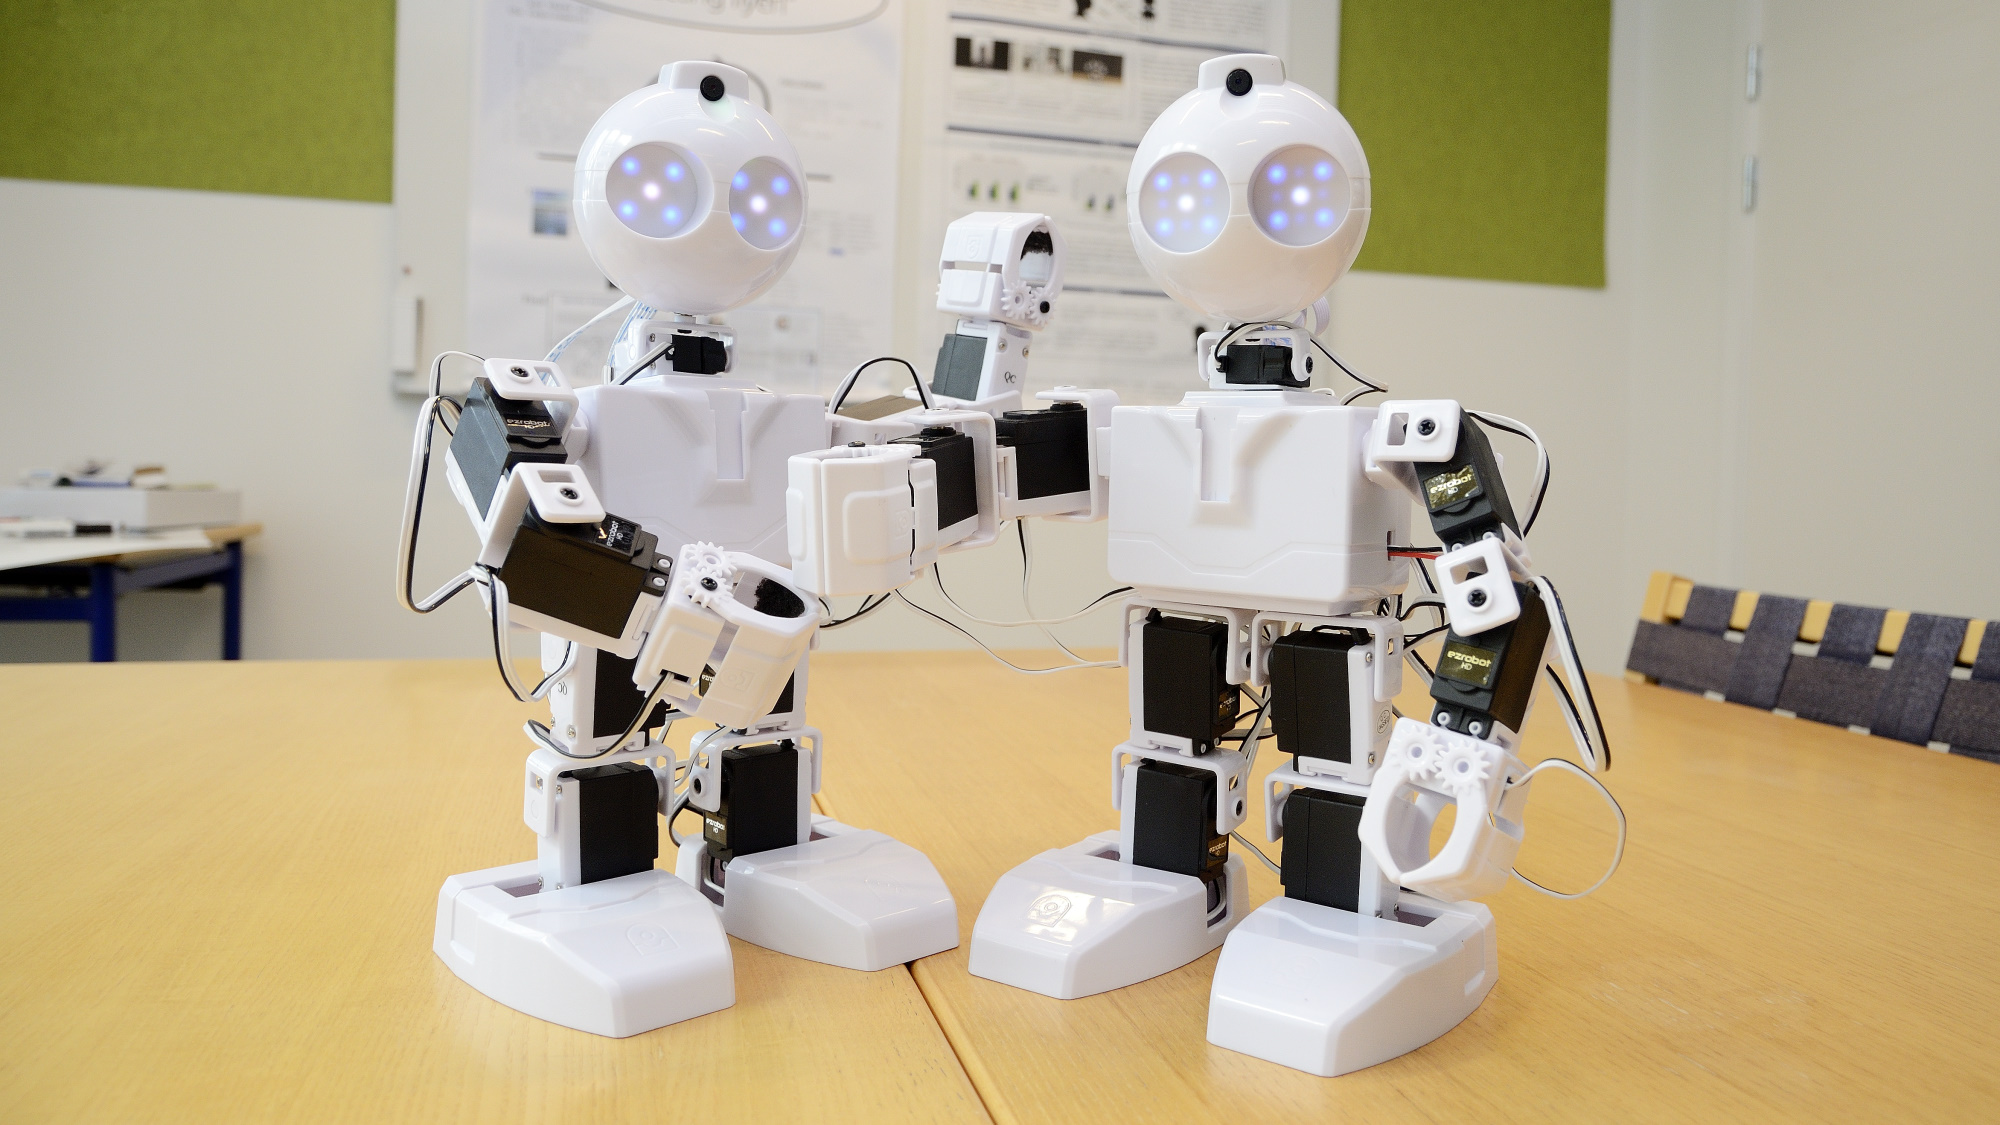 EZ robots are commonly used as a teaching platform on robotics.